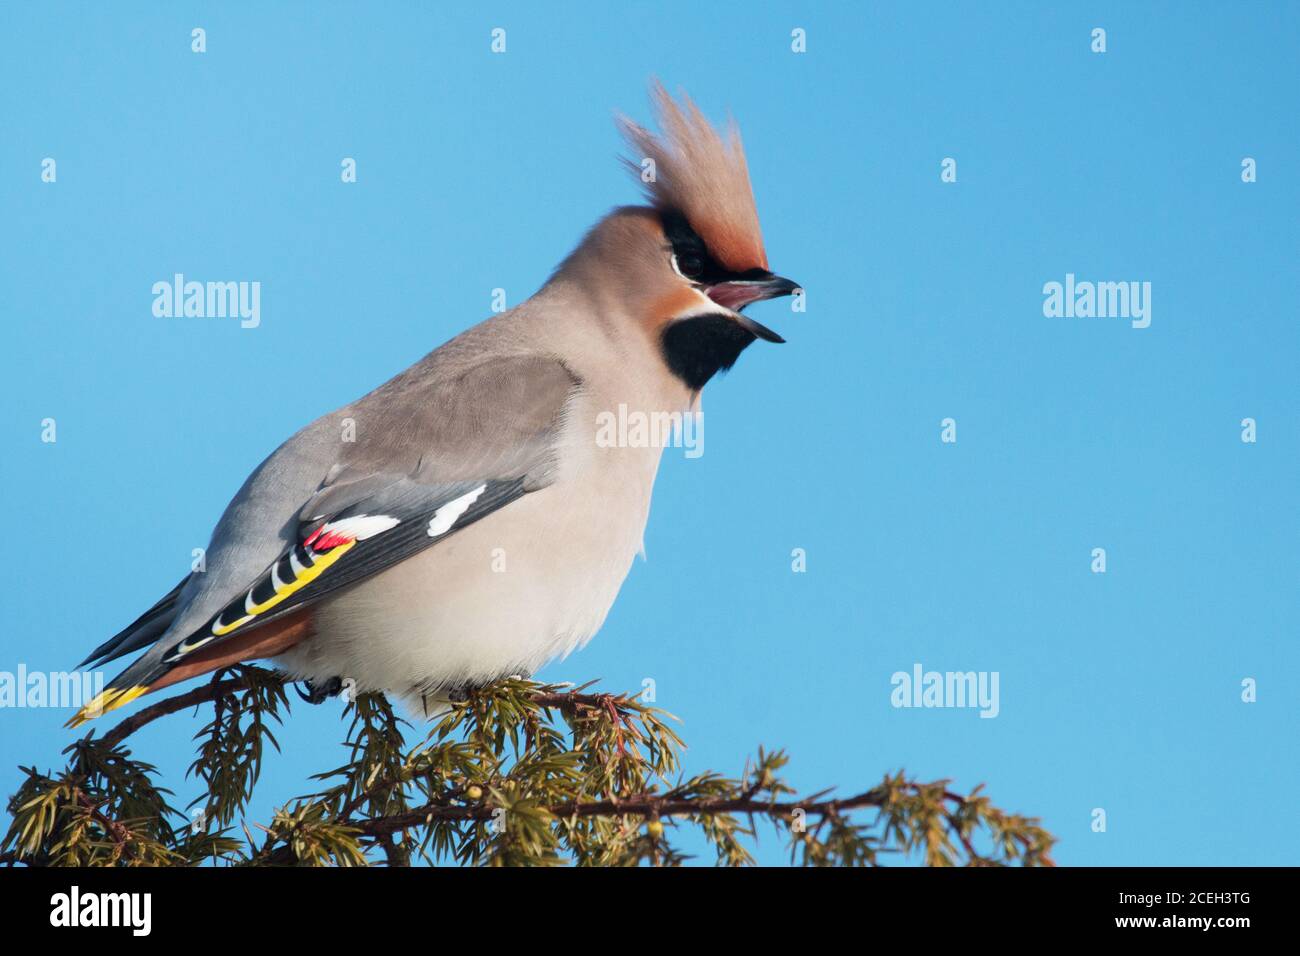 A portrait of a colorful European Northern songbird Bohemian waxwing, Bombycilla garrulus during a winter migration in Estonia. Stock Photo